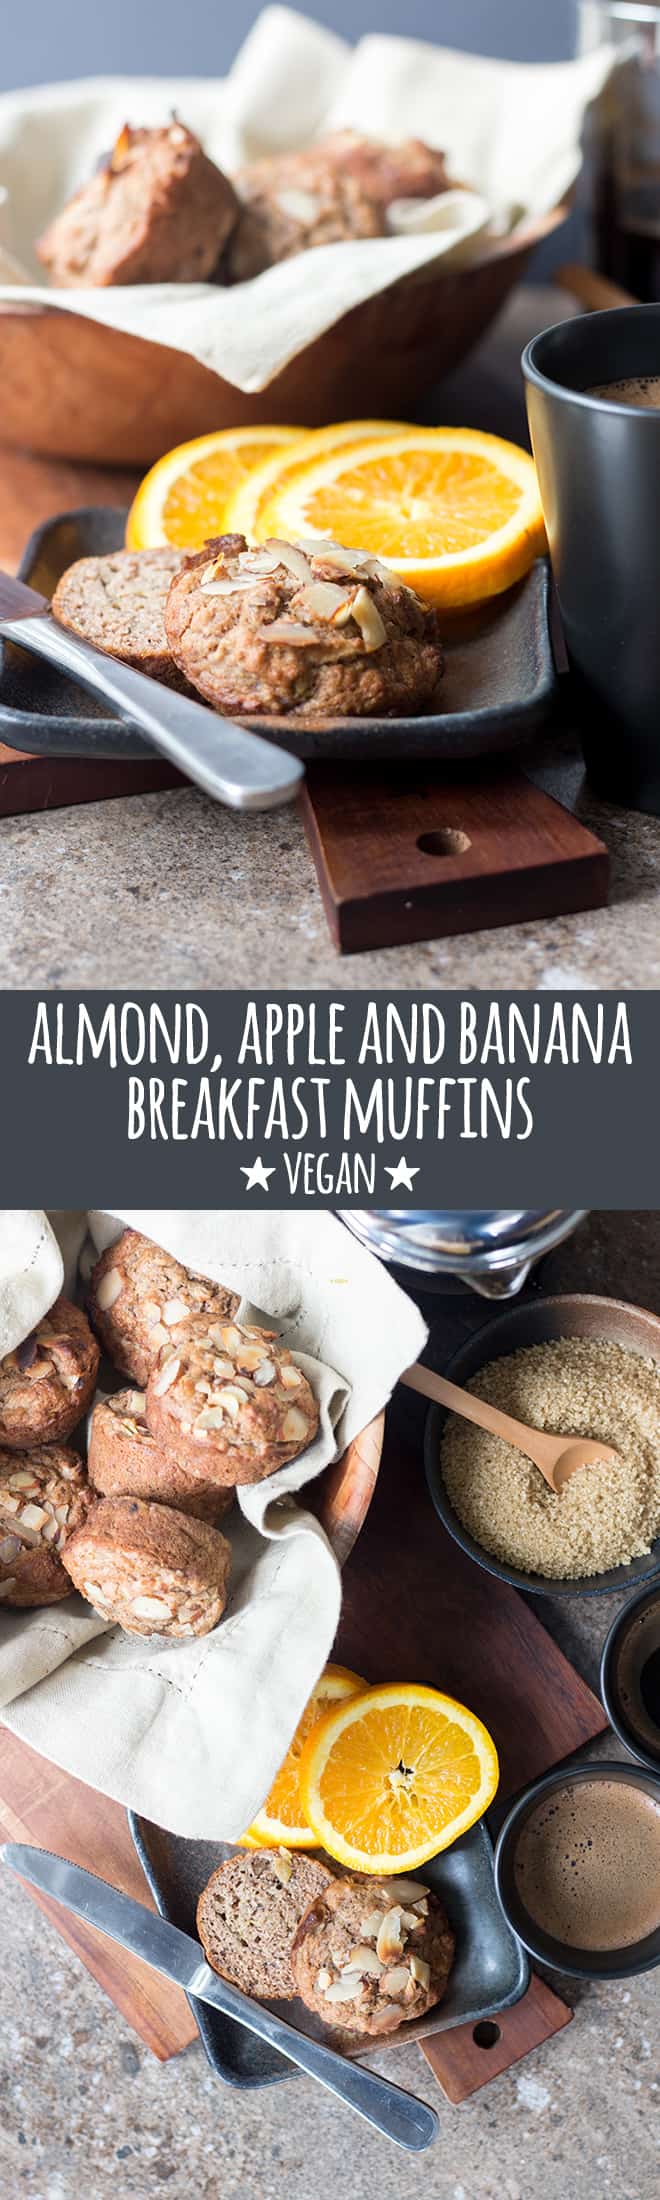 Nourishing almond, apple and banana muffins made with mixed flours and a good dose of LSA are a healthy snack or breakfast on the go.